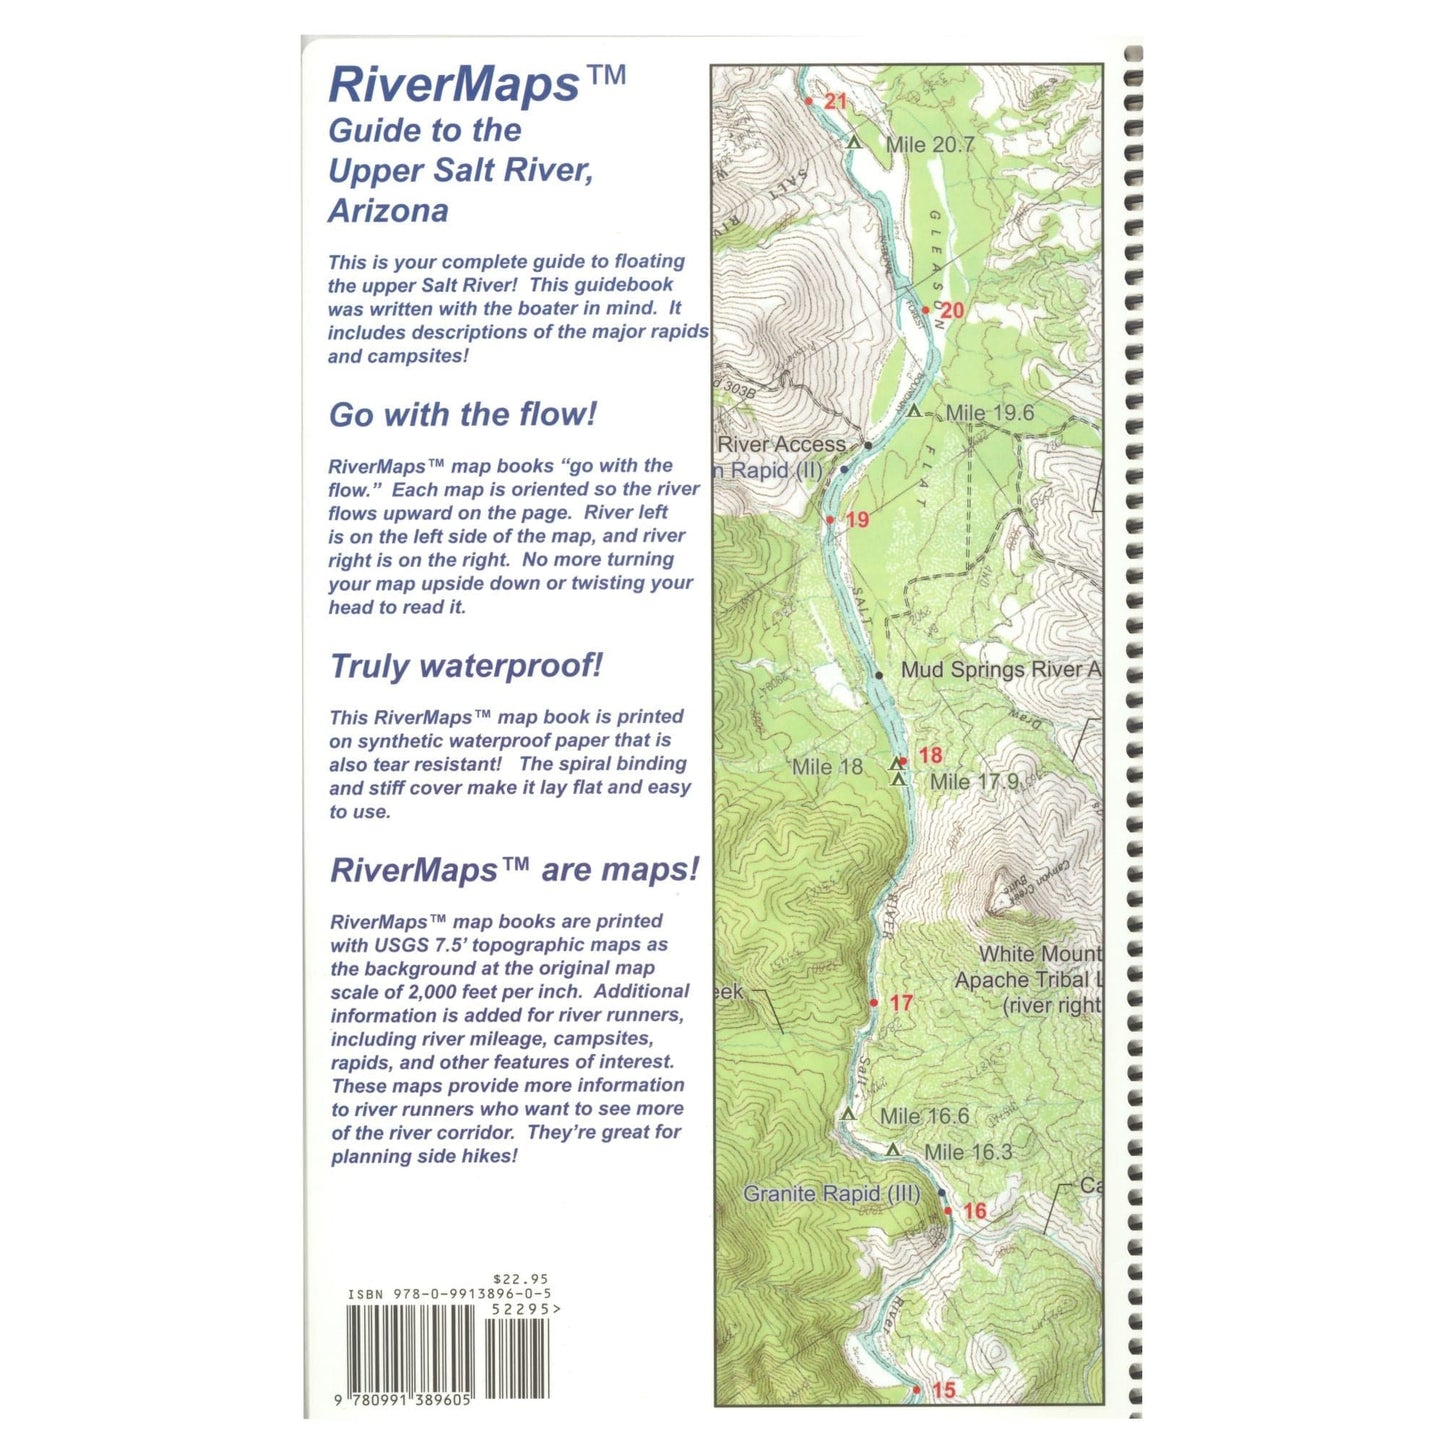 Featuring the Salt River Guide Book guide book manufactured by Rivermaps shown here from a second angle.